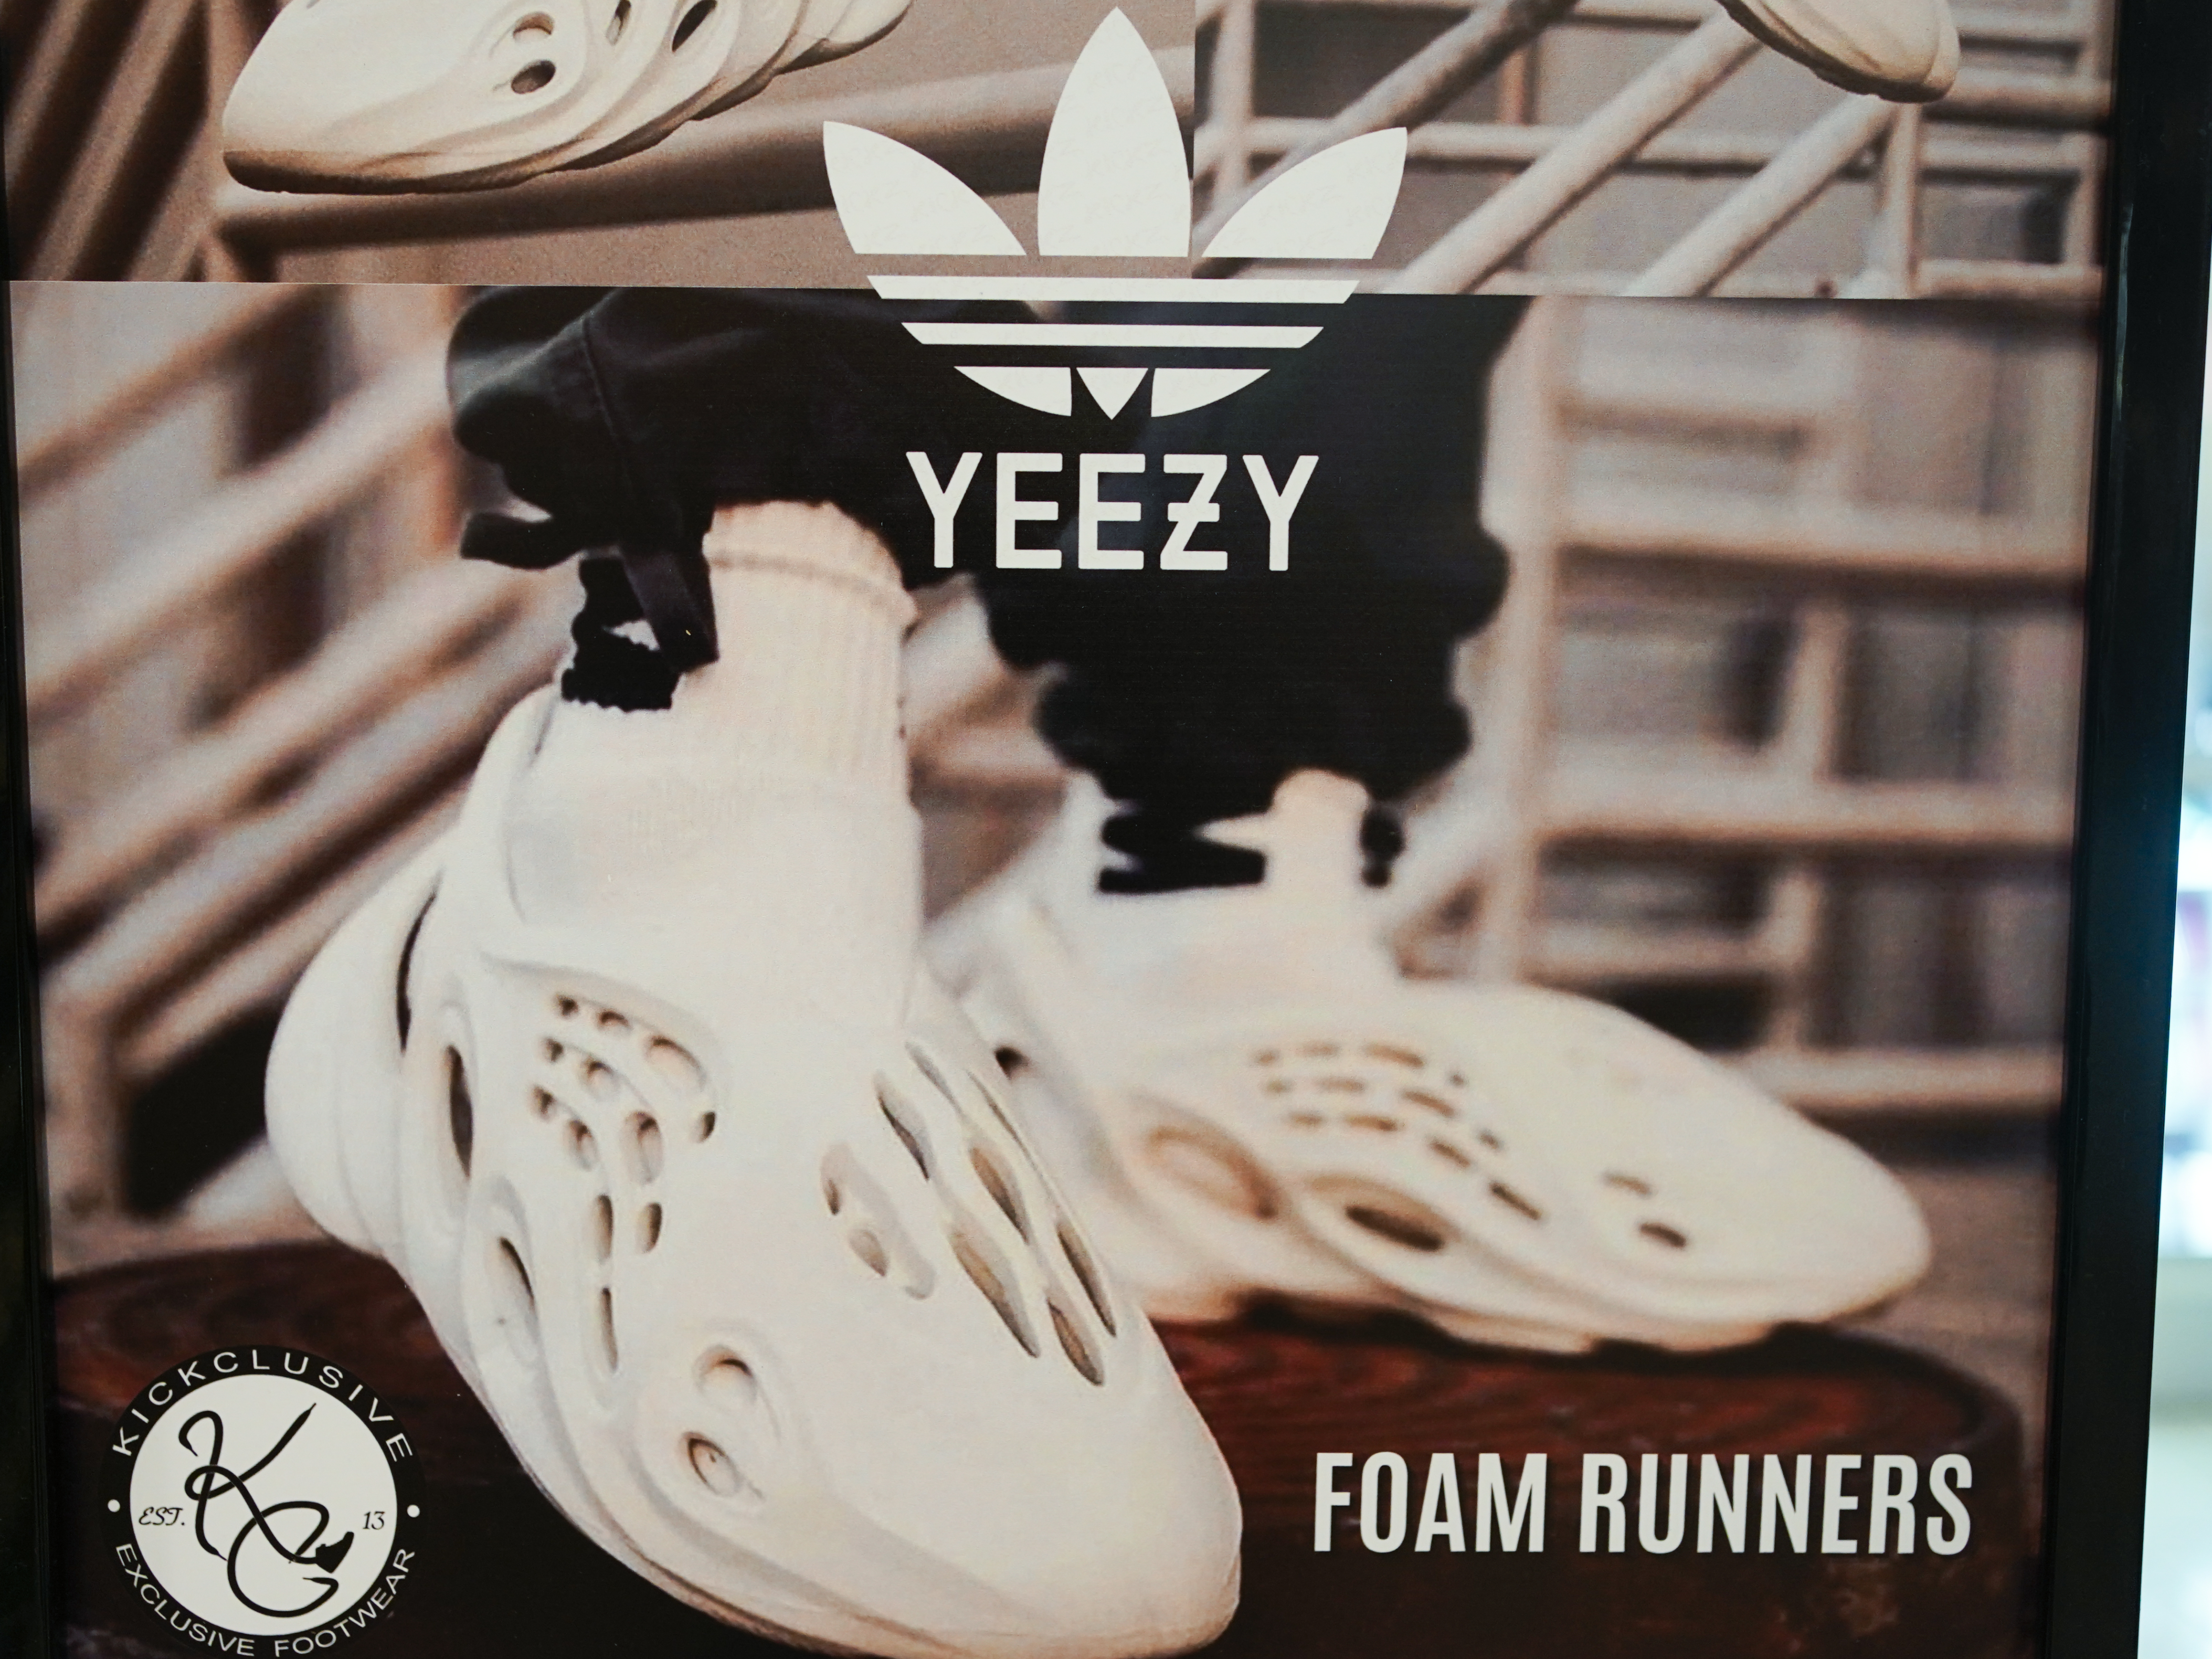 Adidas finally a for stockpile of Yeezy shoes - OPB